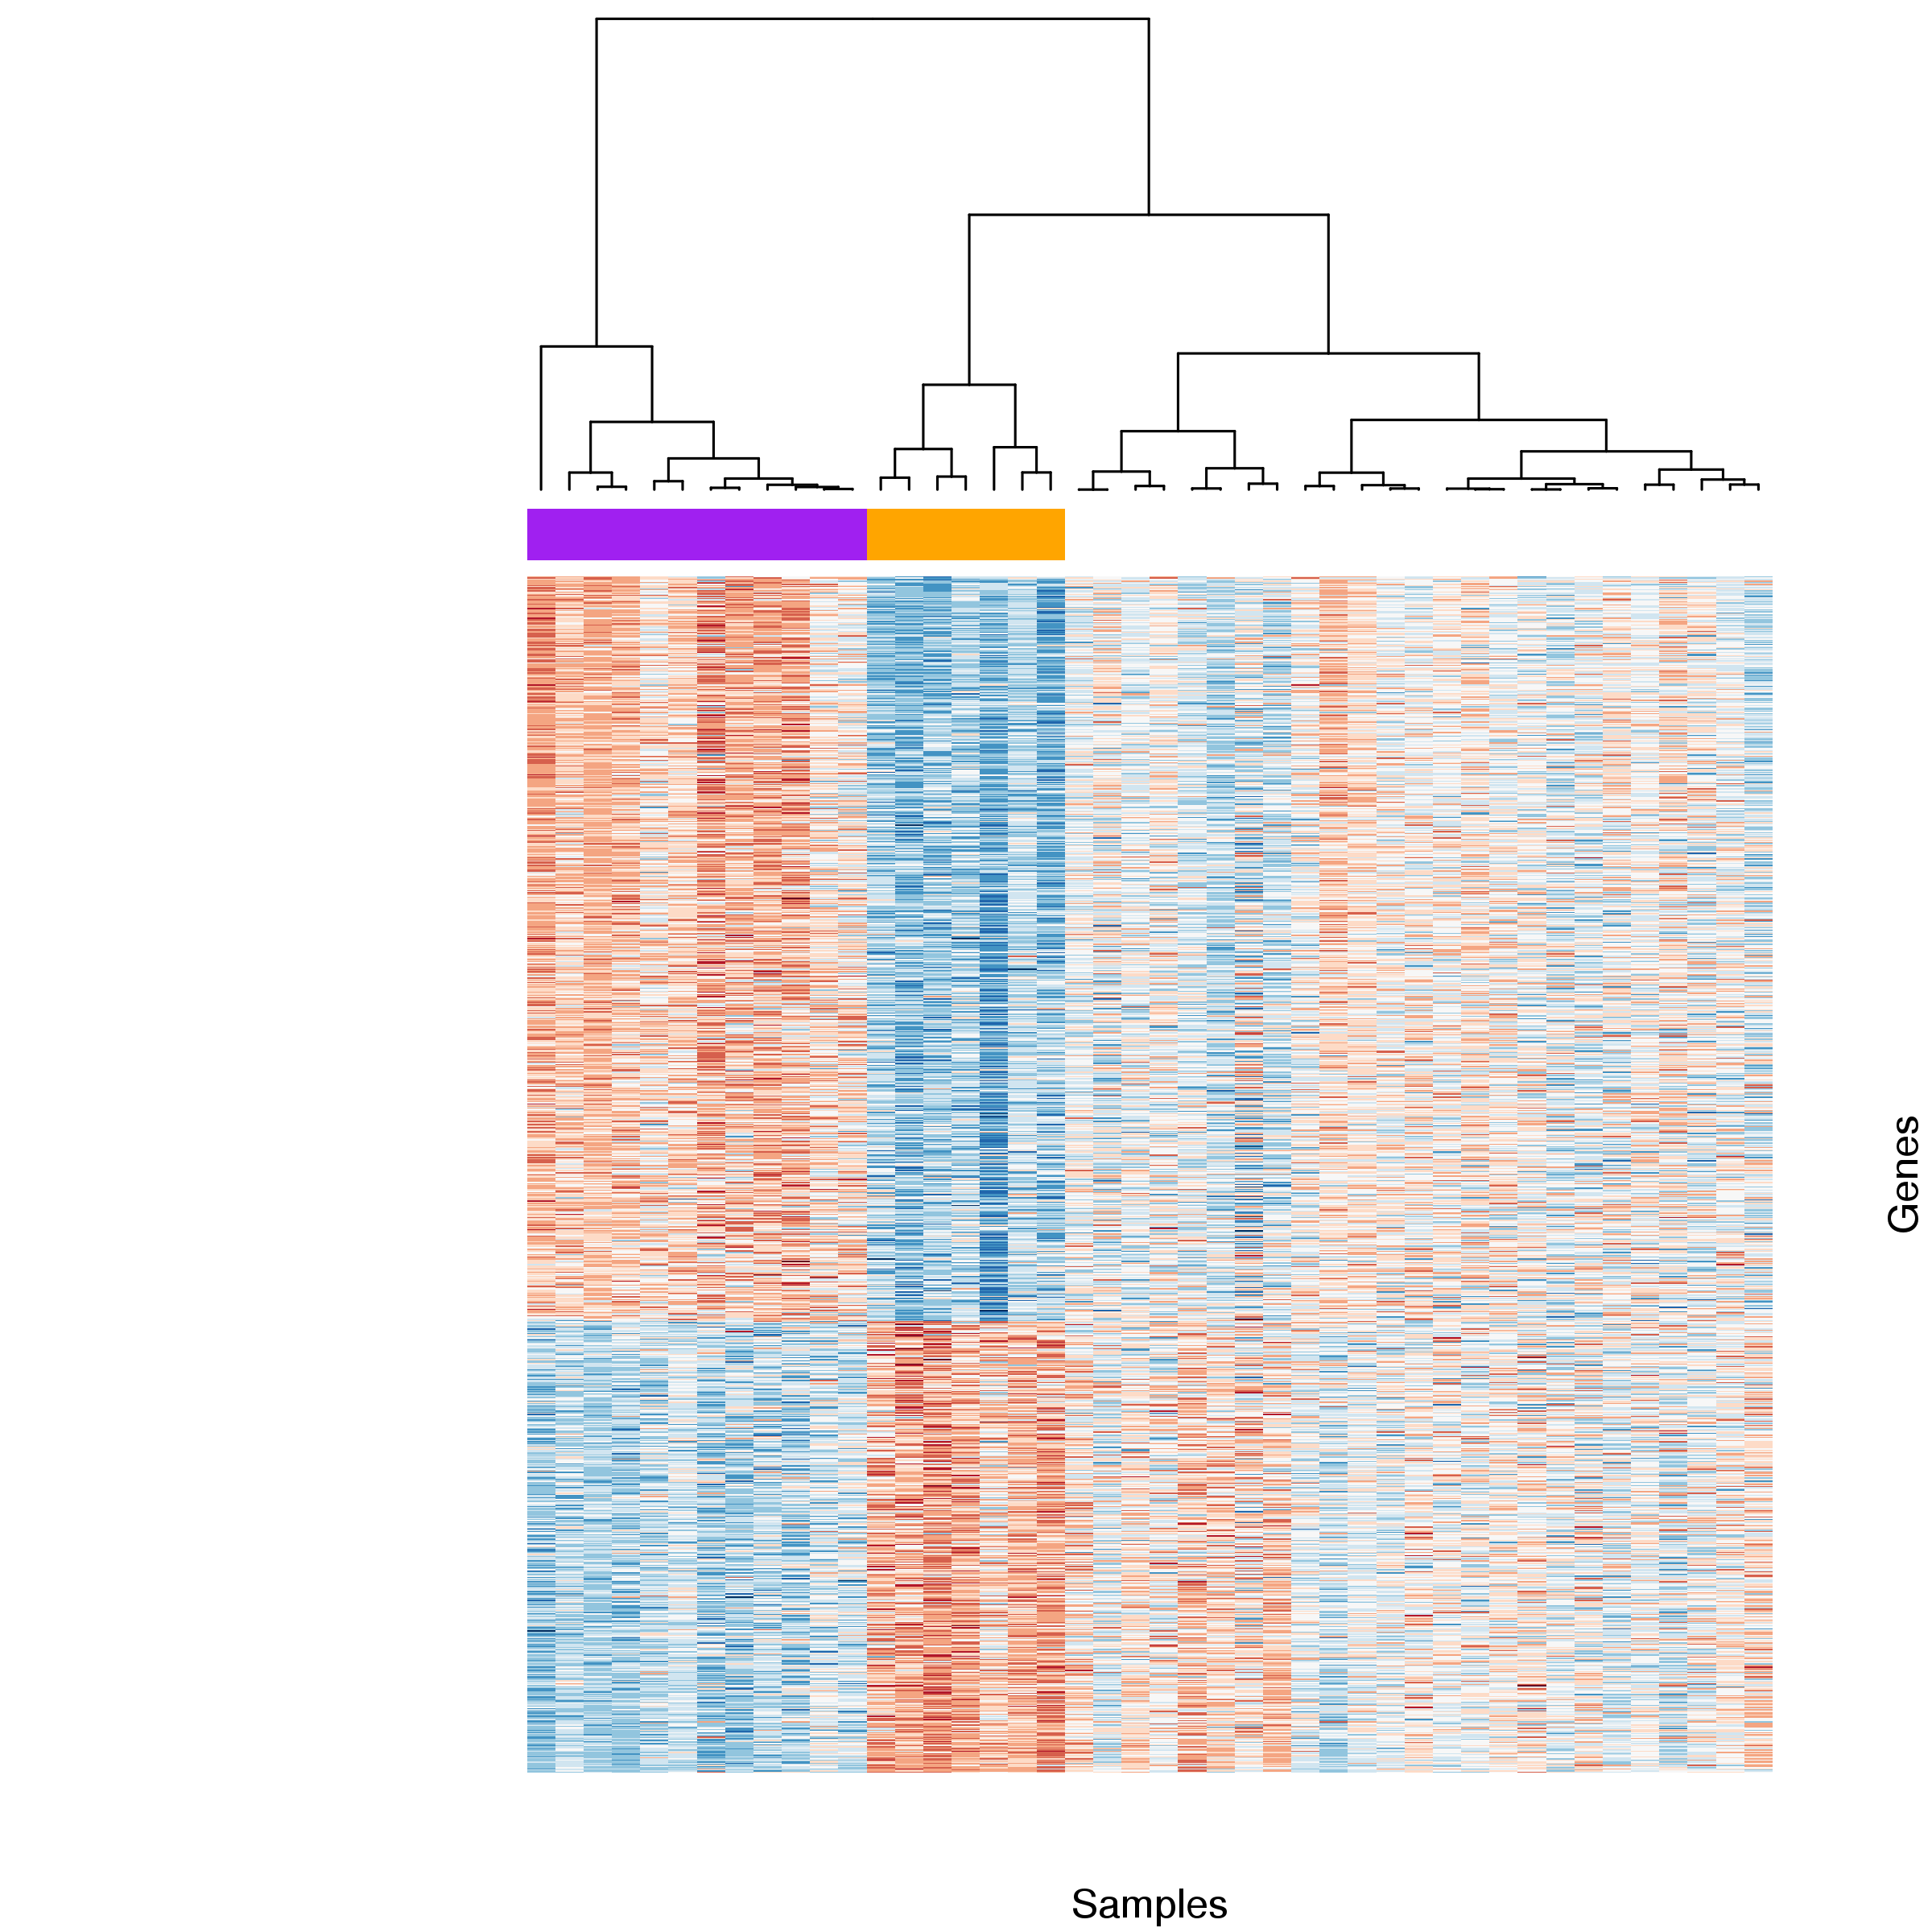 **Figure 18:** Heatmap comparing gene expression for genes differentially expressed between clusters 1 and 2. Expression estimates for each gene were scaled and centred across samples. Blue cells correspond to lower and red cells to higher than average expression.